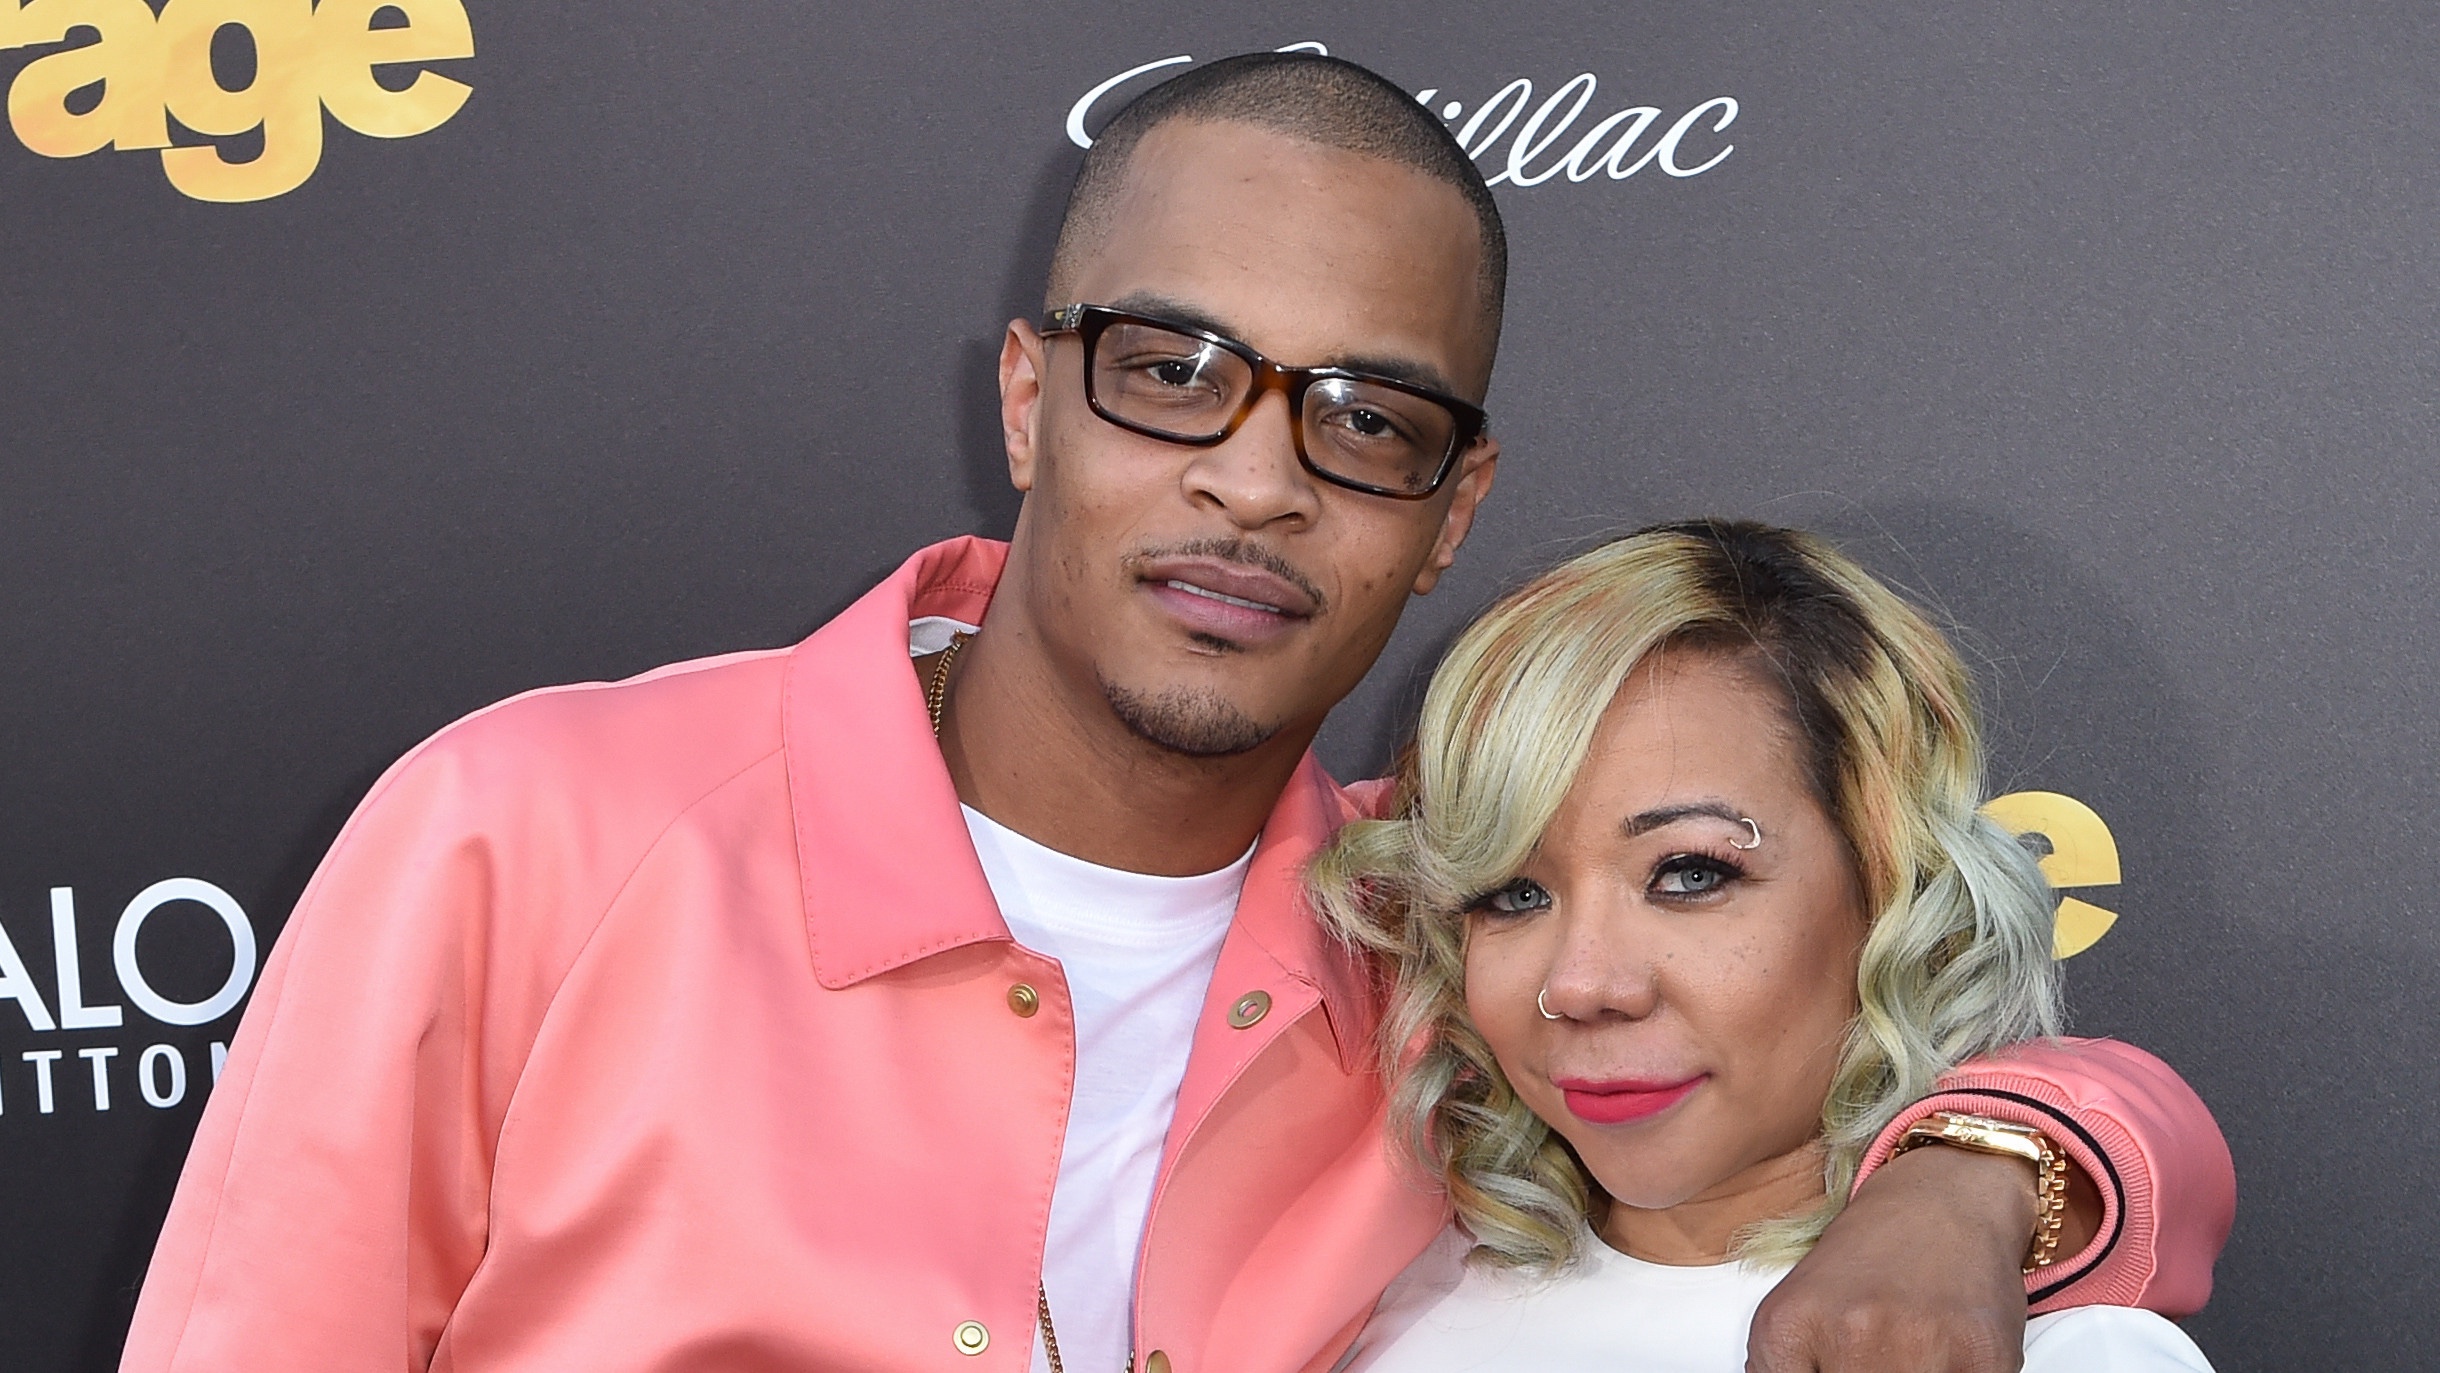 Rapper T.I and wife Tiny Harris under investigation for alleged sexual assault in Los Angeles